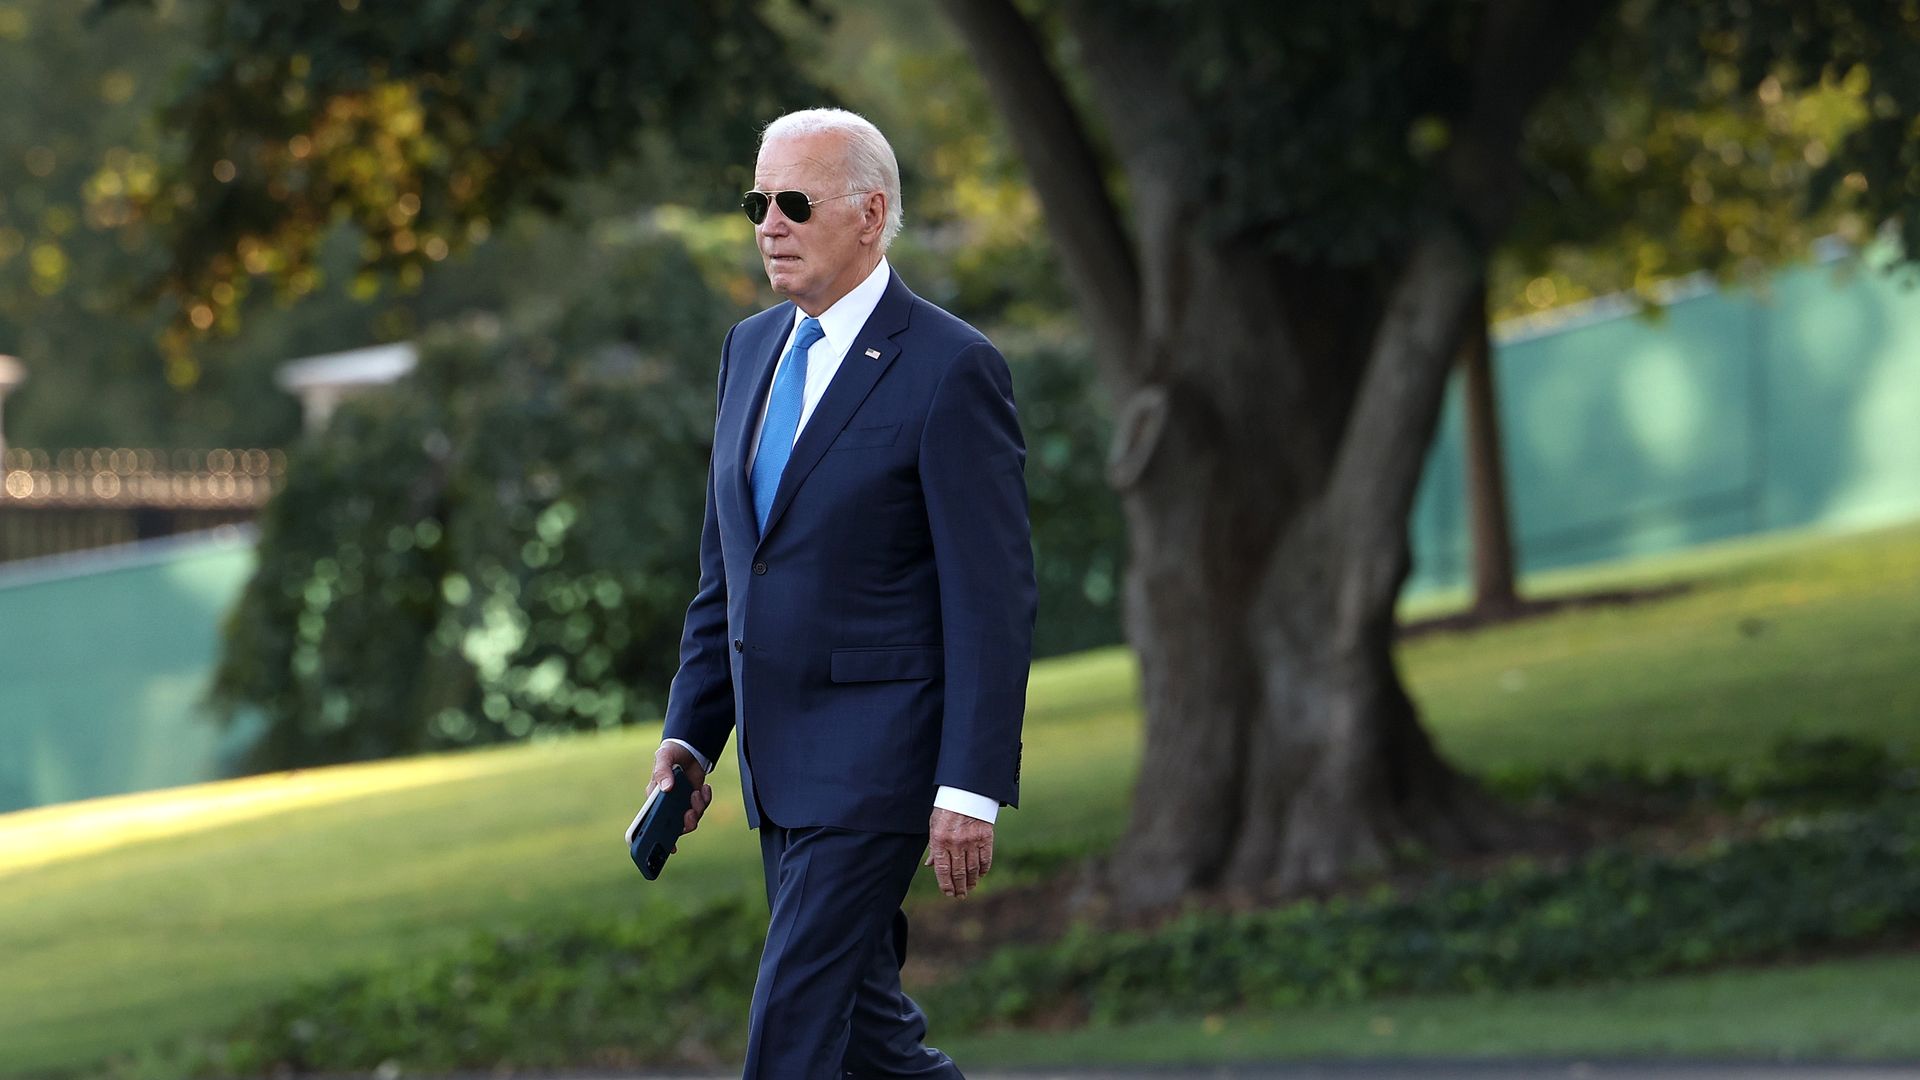 President Biden walks across the White House lawn wearing a blue suit and sunglasses.